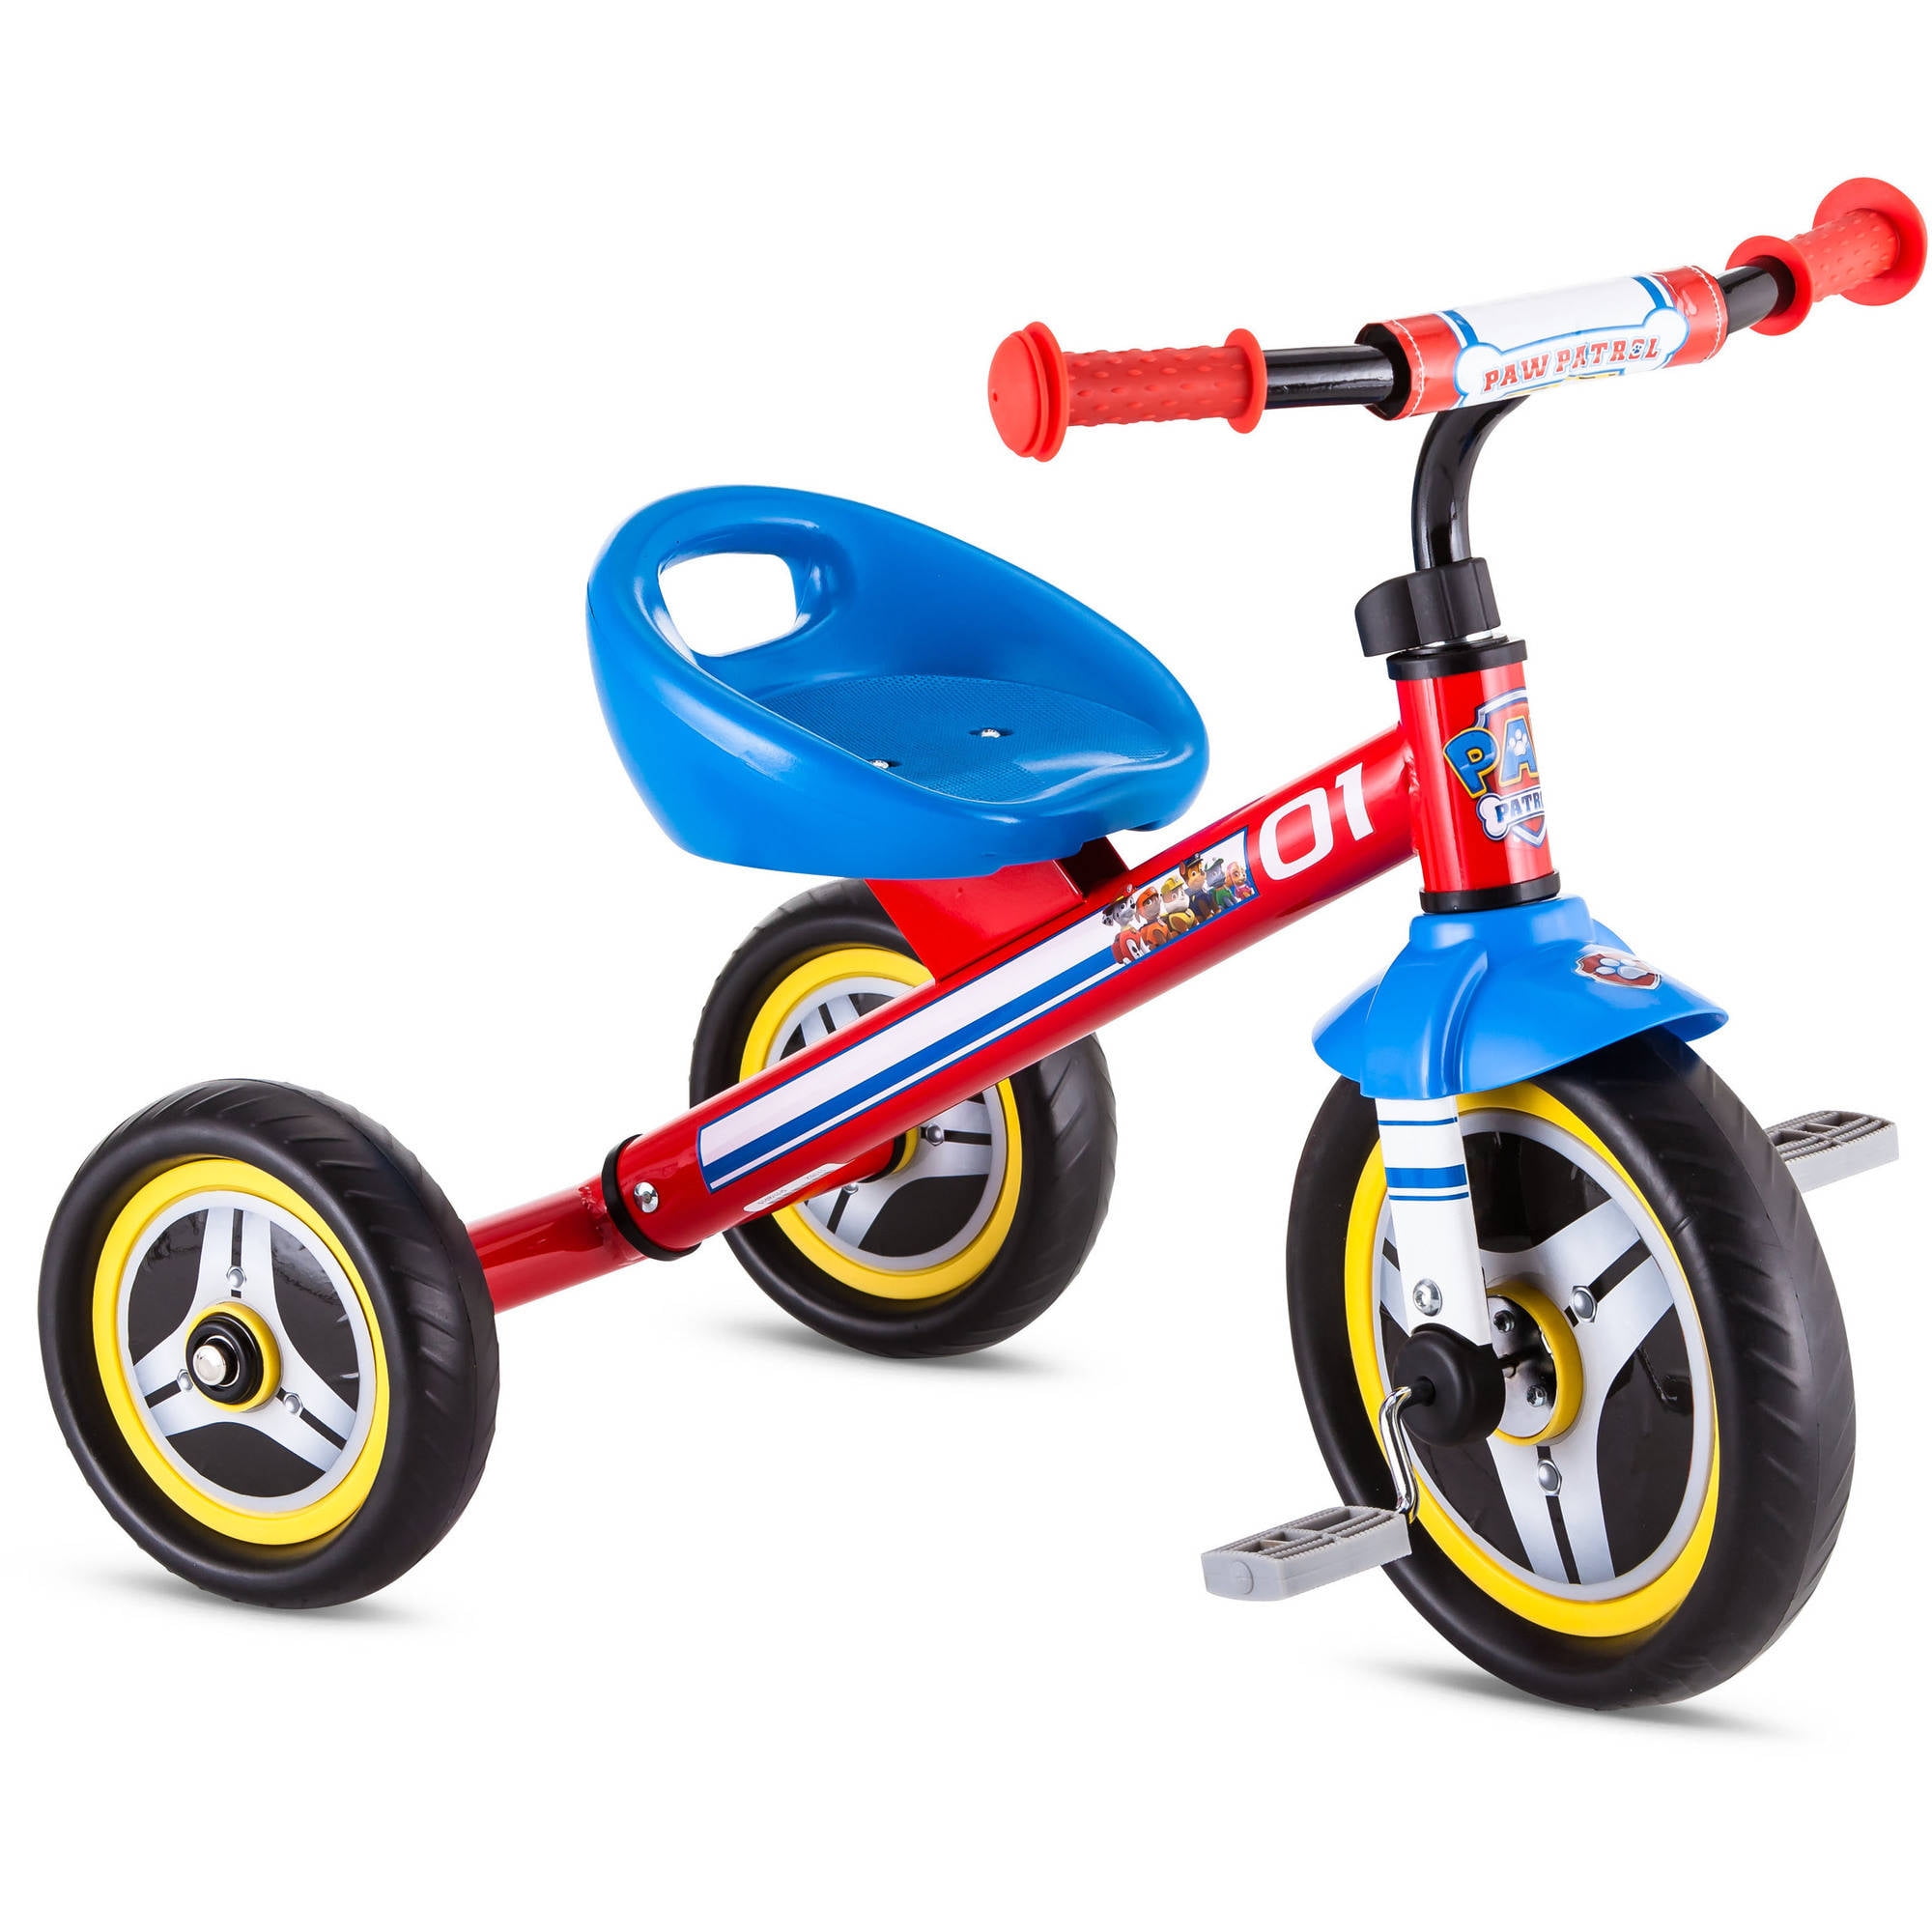 Details about   Razor Riprider 360 Drifting Trike Blue 3 Wheel Drifting Action Blue Rubber Grips 